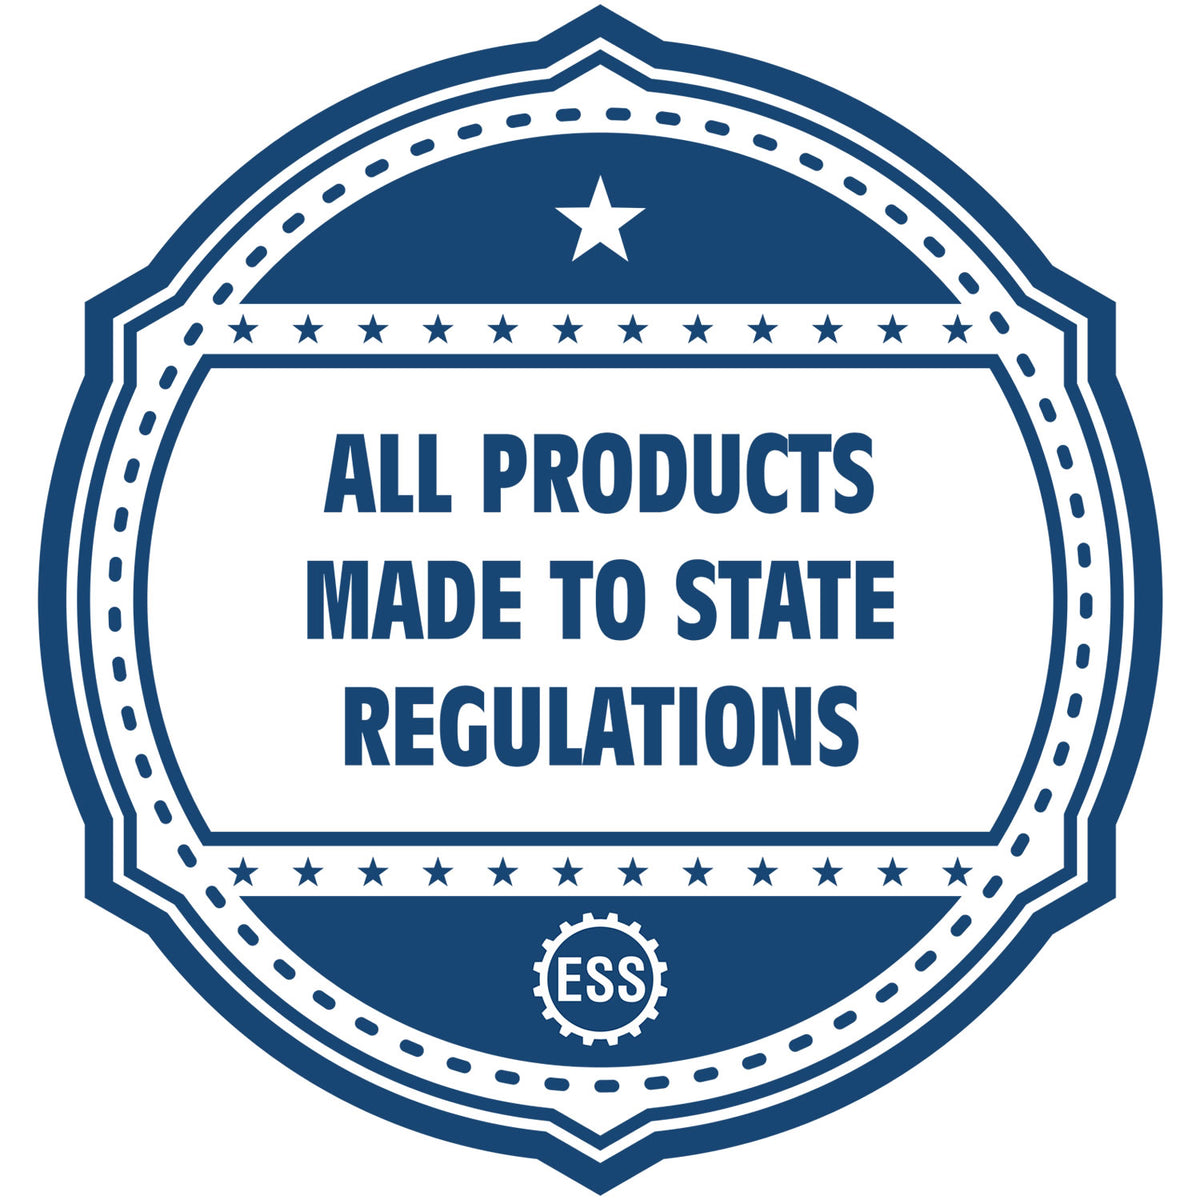 A blue icon or badge for the Gift Delaware Landscape Architect Seal showing that this product is made in compliance with state regulations.